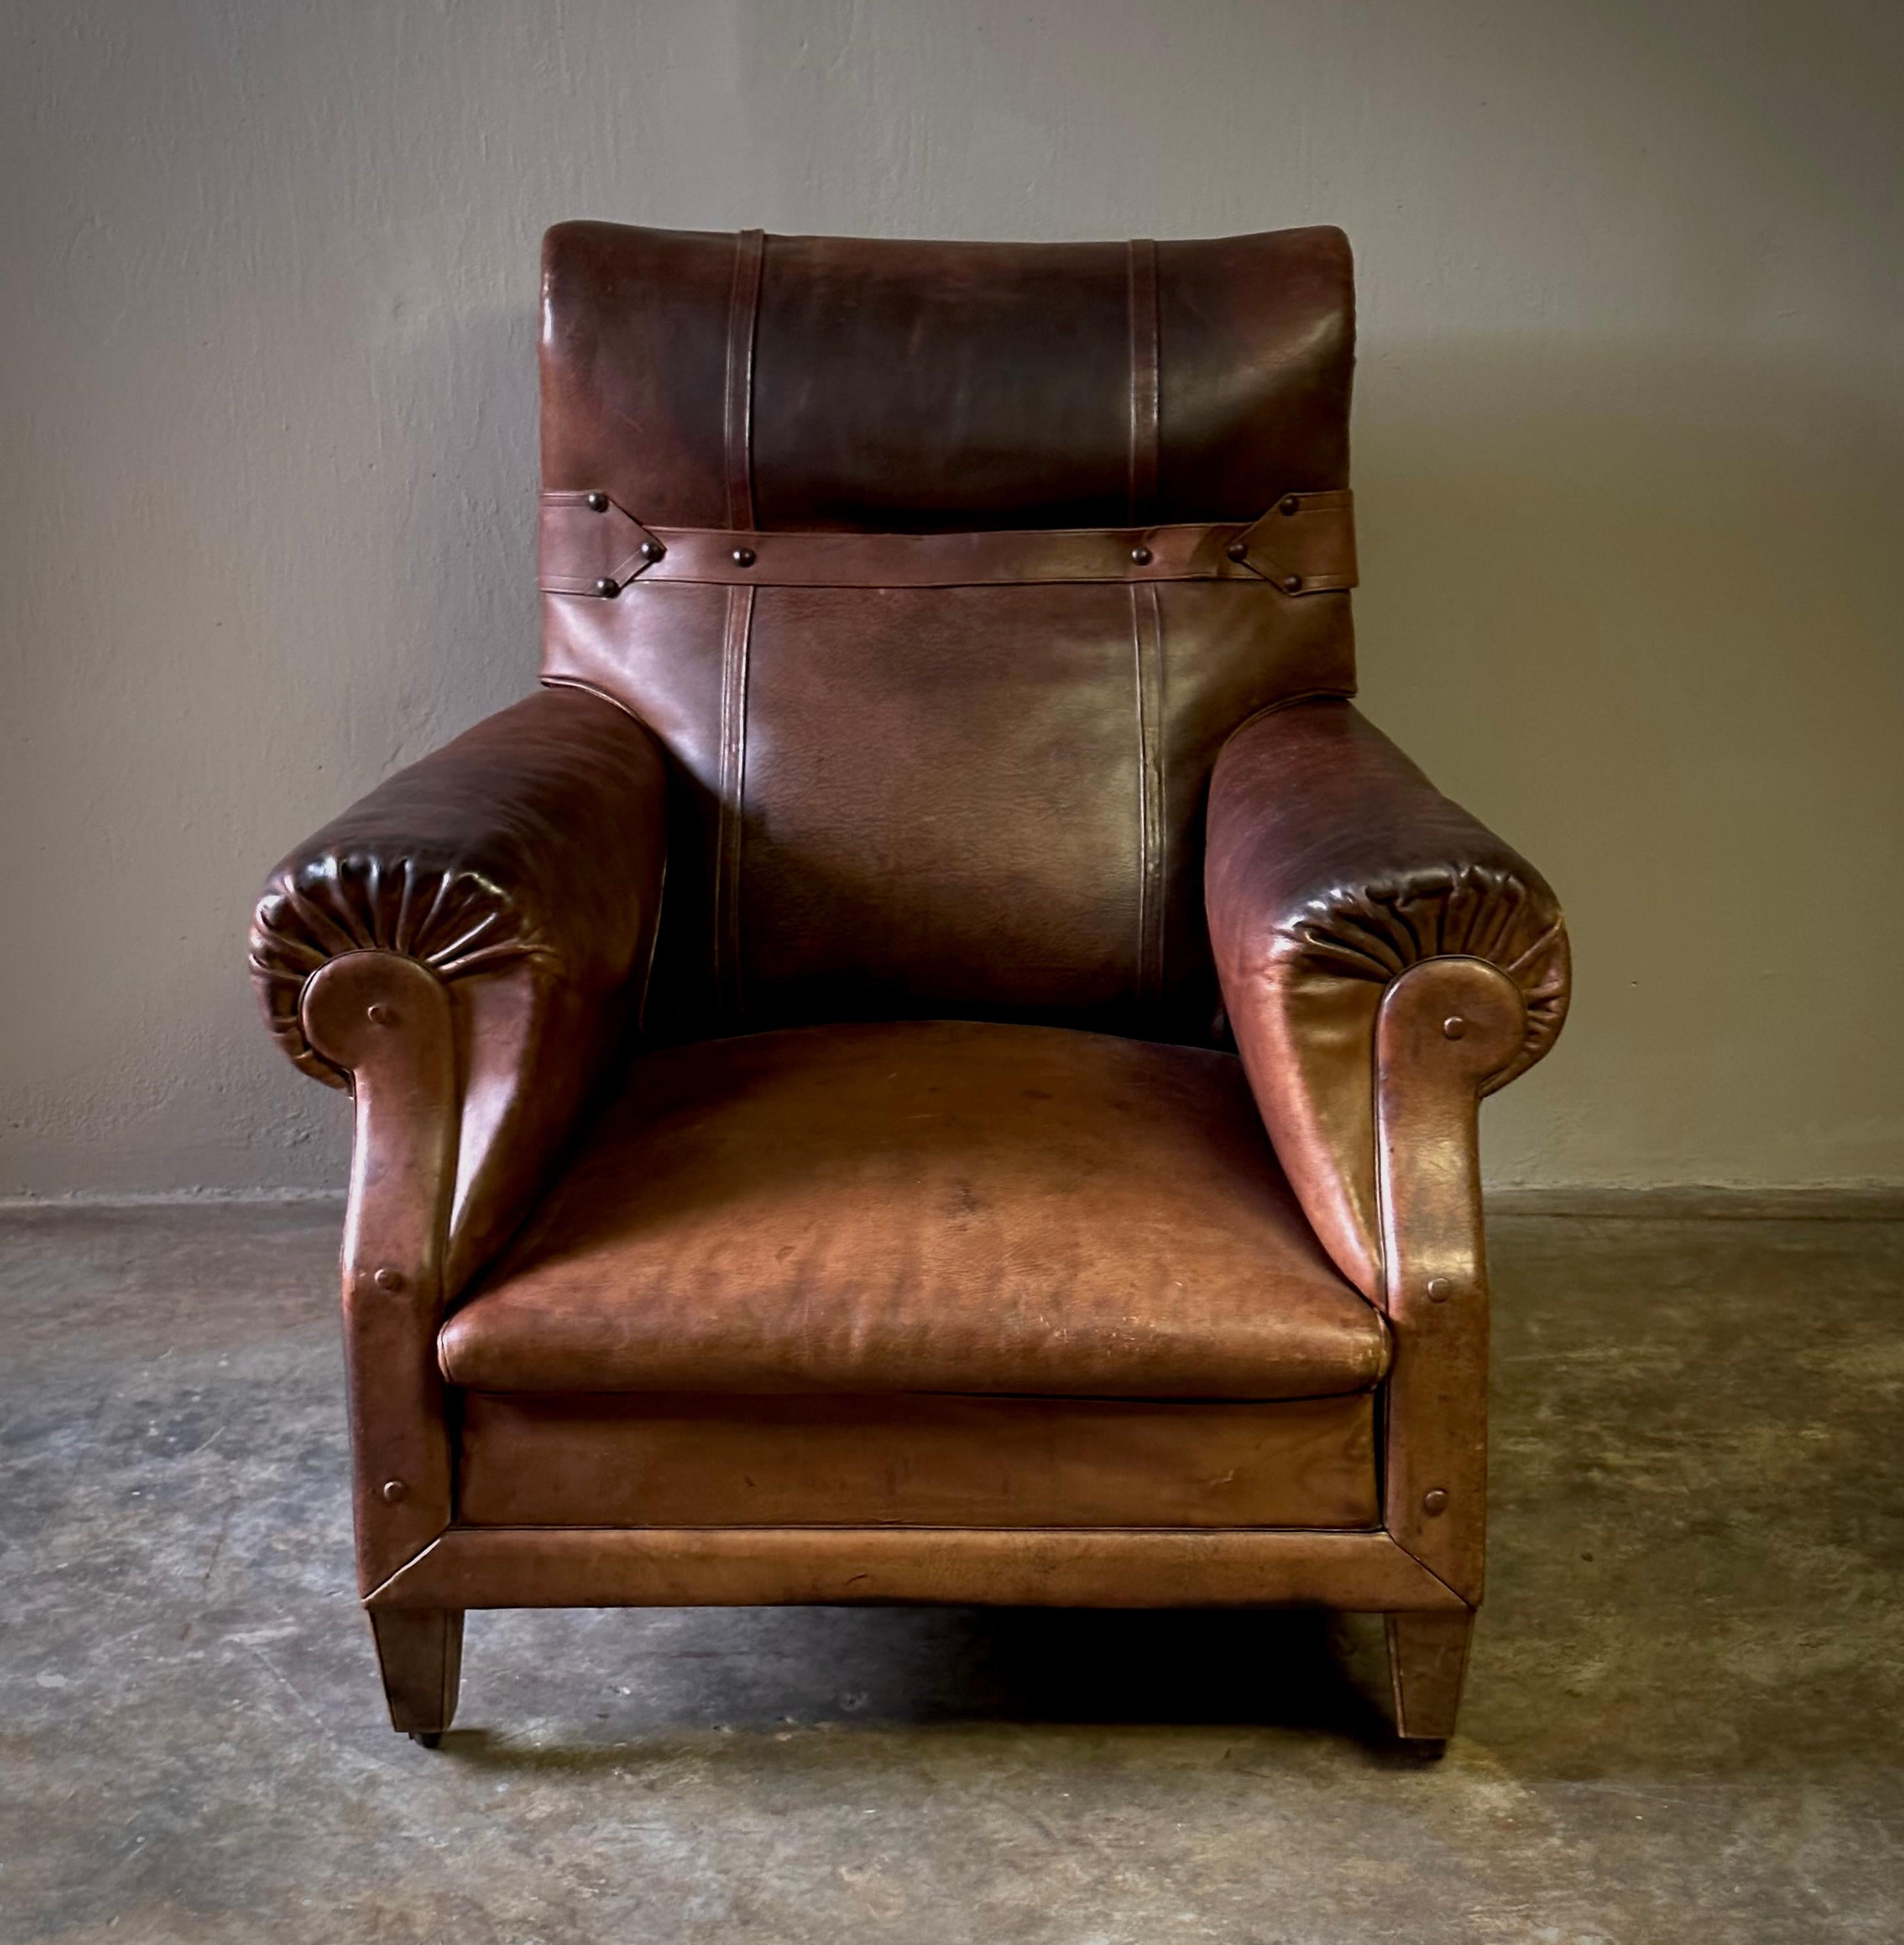 French 1940s chestnut leather semi-winged arm chair with industrial metal studded strap accent. Beautifully aged leather and unique detailing give this handsome piece a clubby, sporty feel. 

France, circa 1940

Dimensions: 35.4W x 35.4D x 37.8H